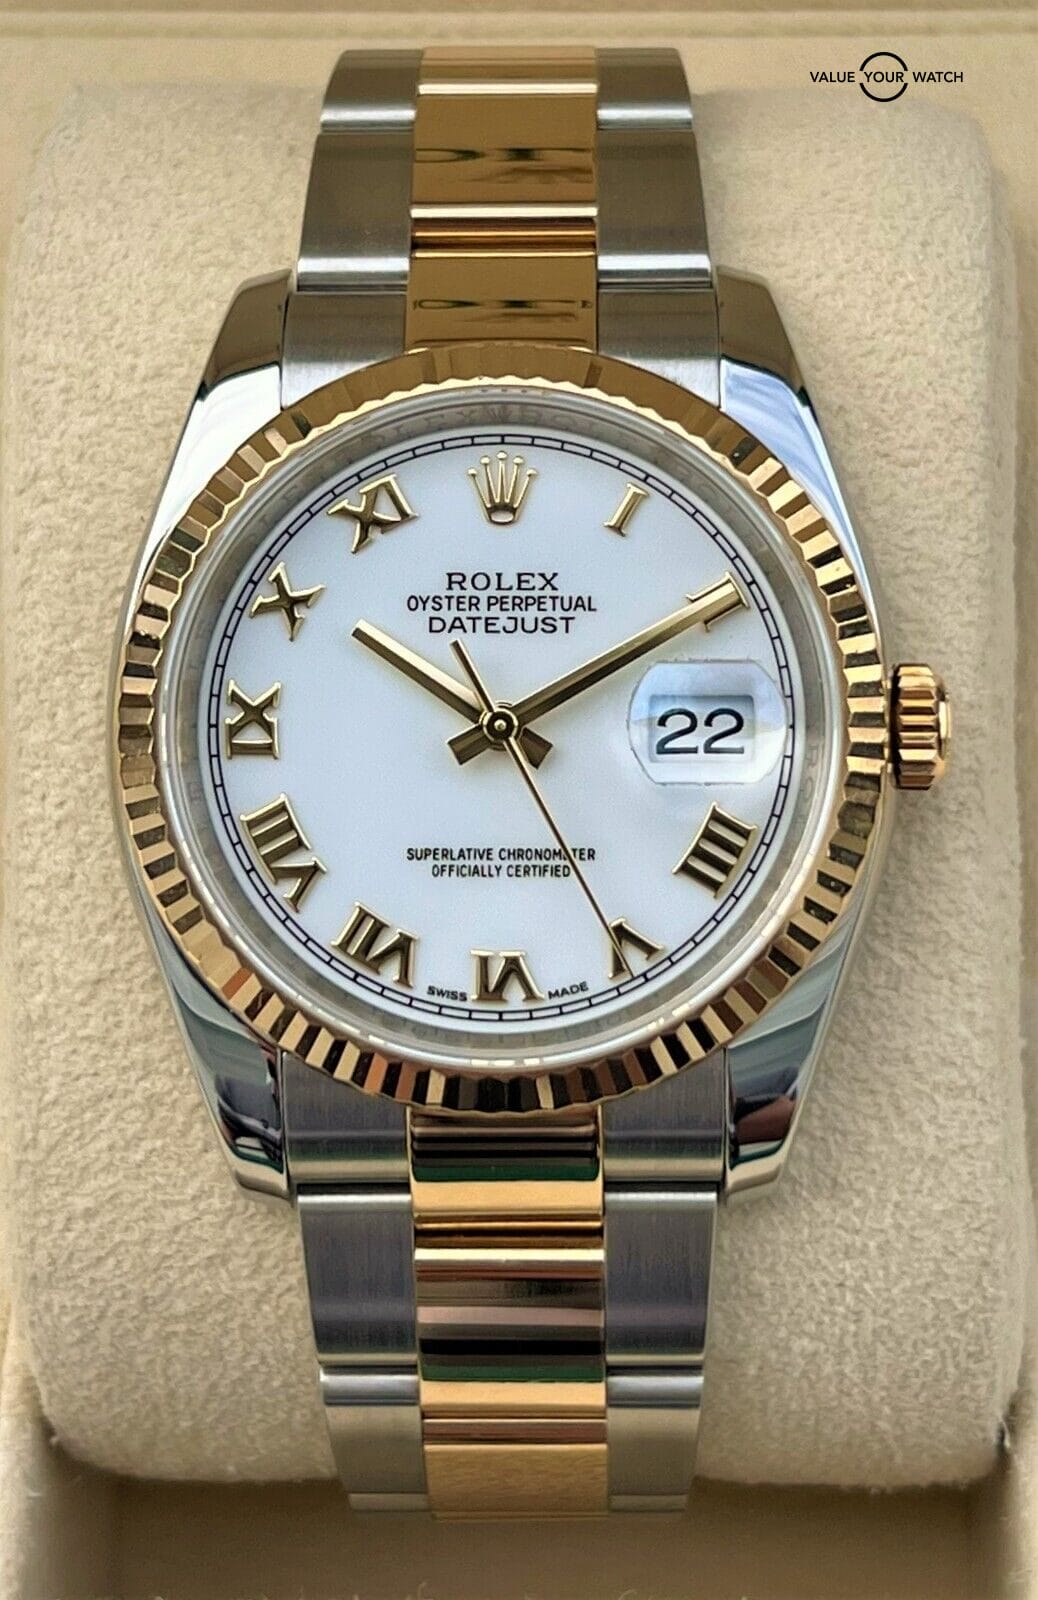 Rolex 18K Yellow Gold & Steel 116233 | Value Your Watch